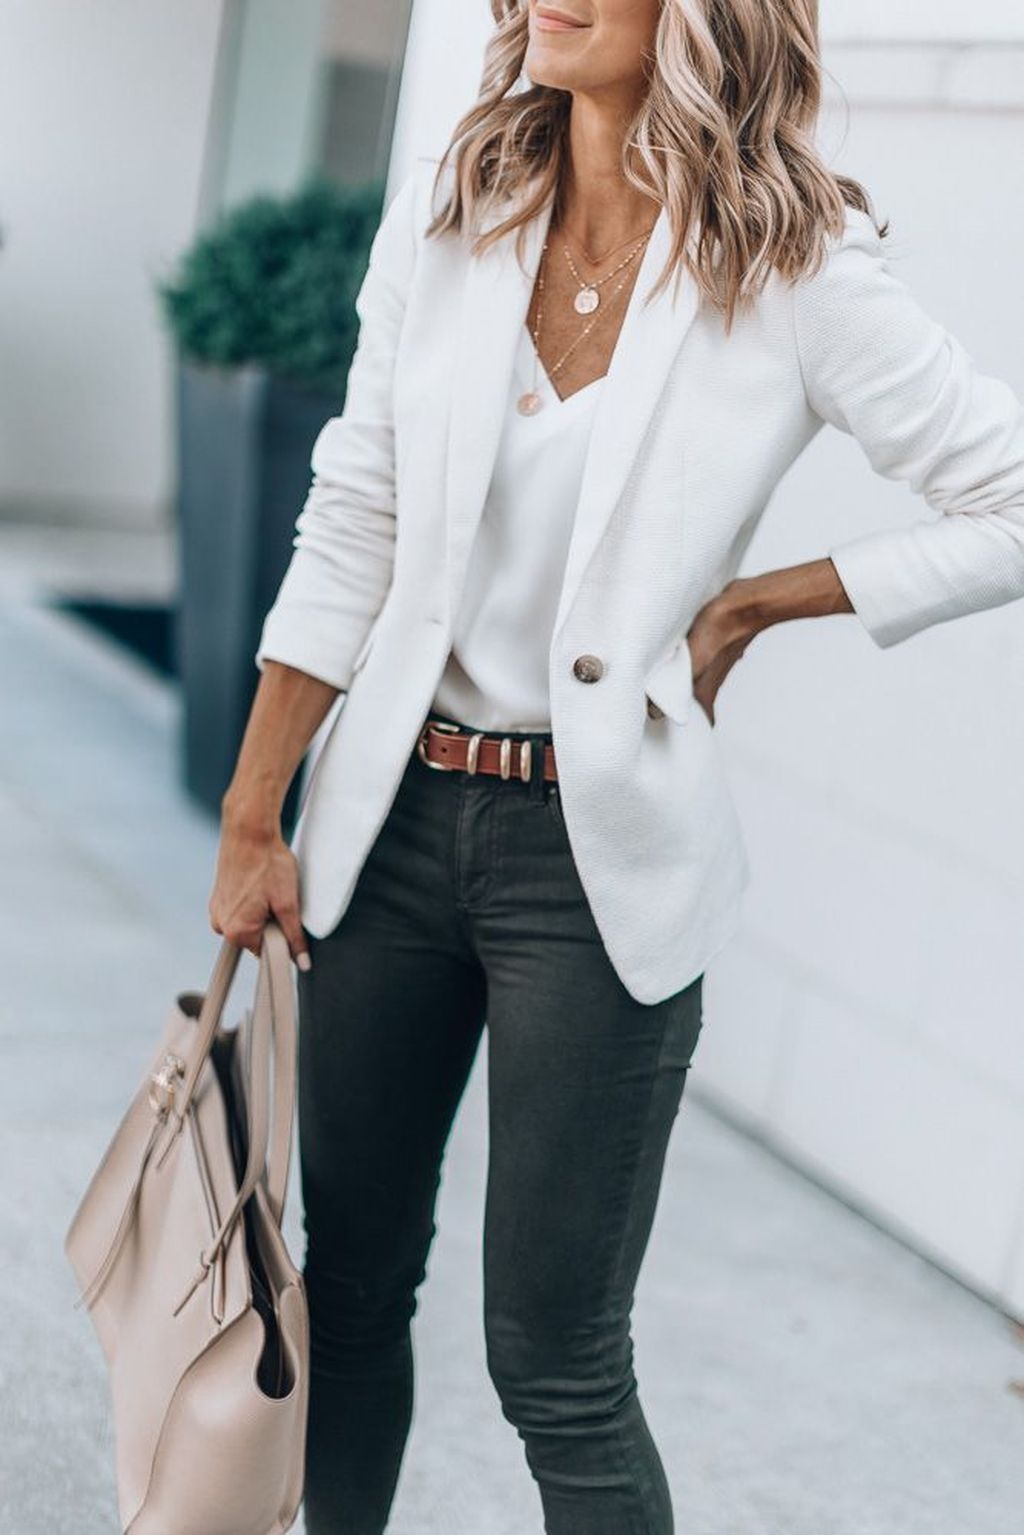 36 Incredible Women Work Outfits Ideas Trends Winter -   25 style women casual
 ideas